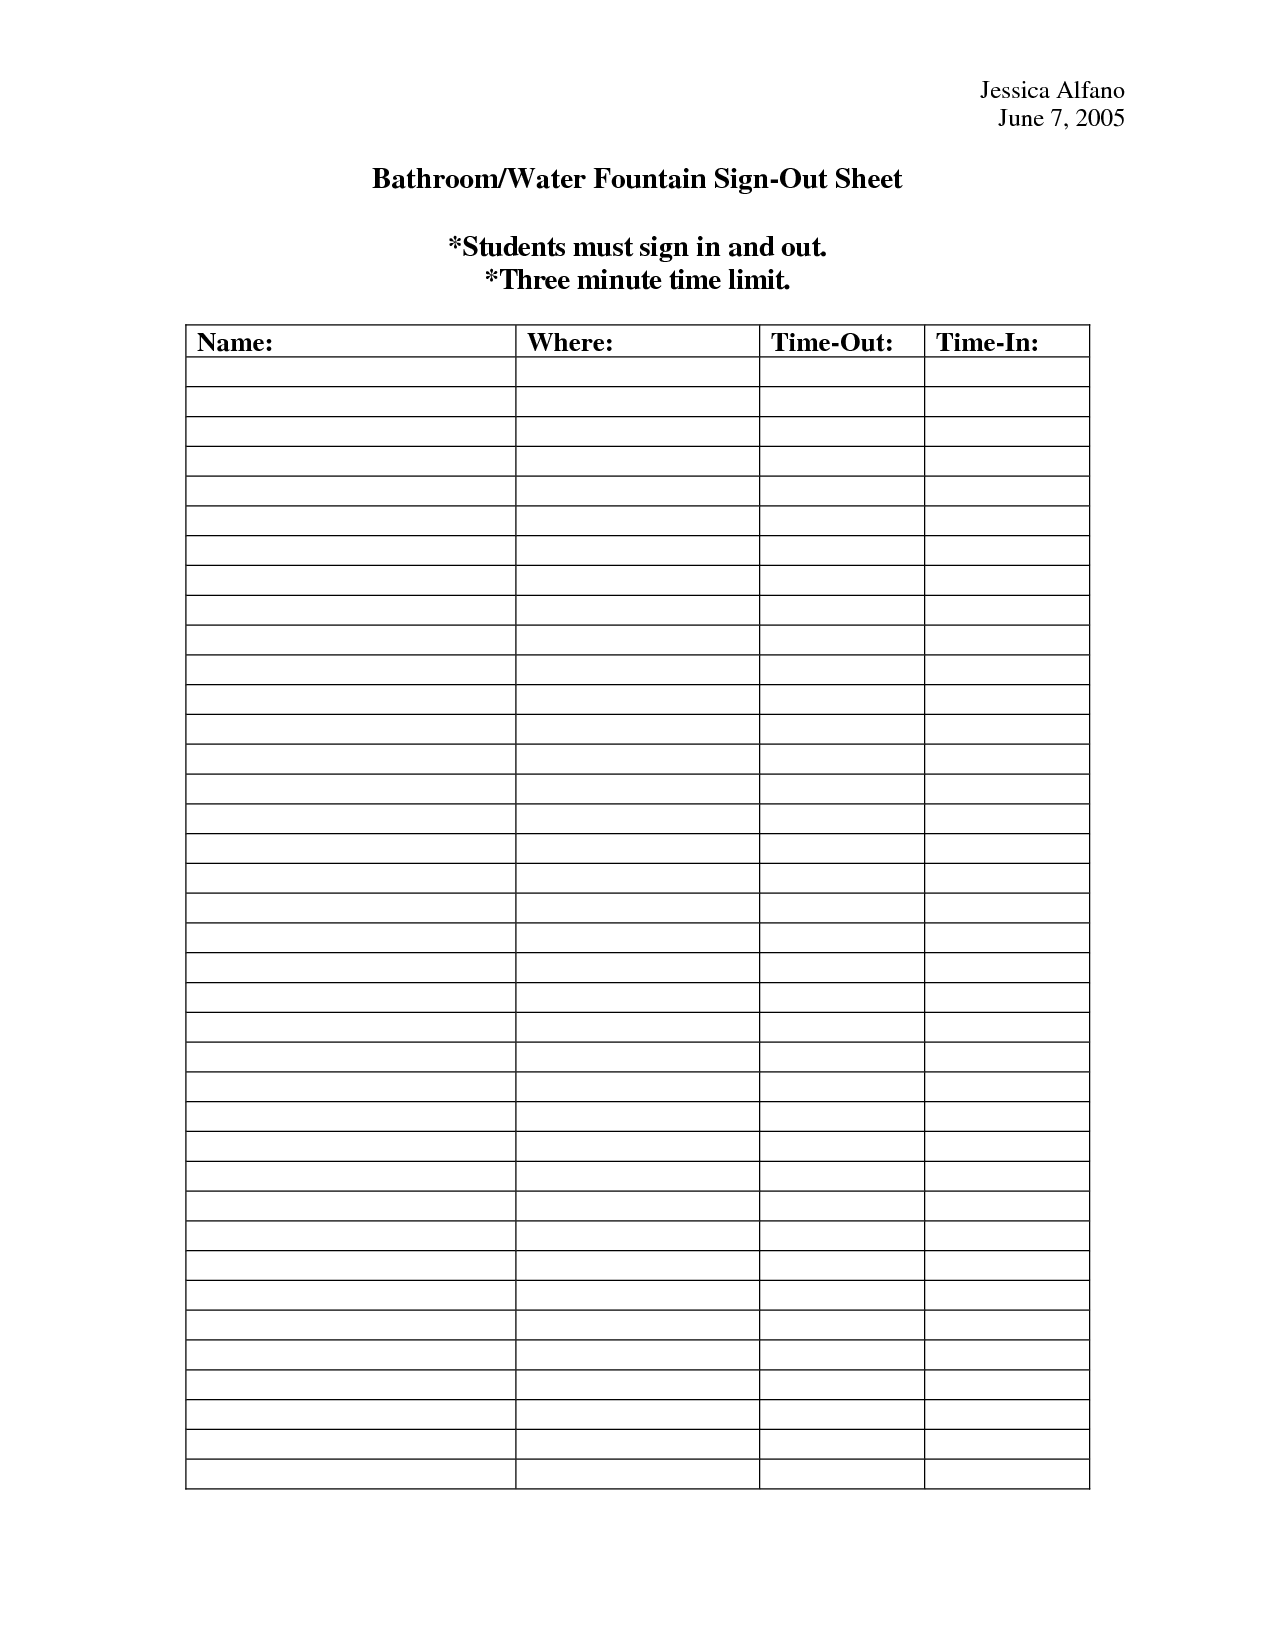 8-best-images-of-bathroom-sign-out-printable-bathroom-sign-out-sheet